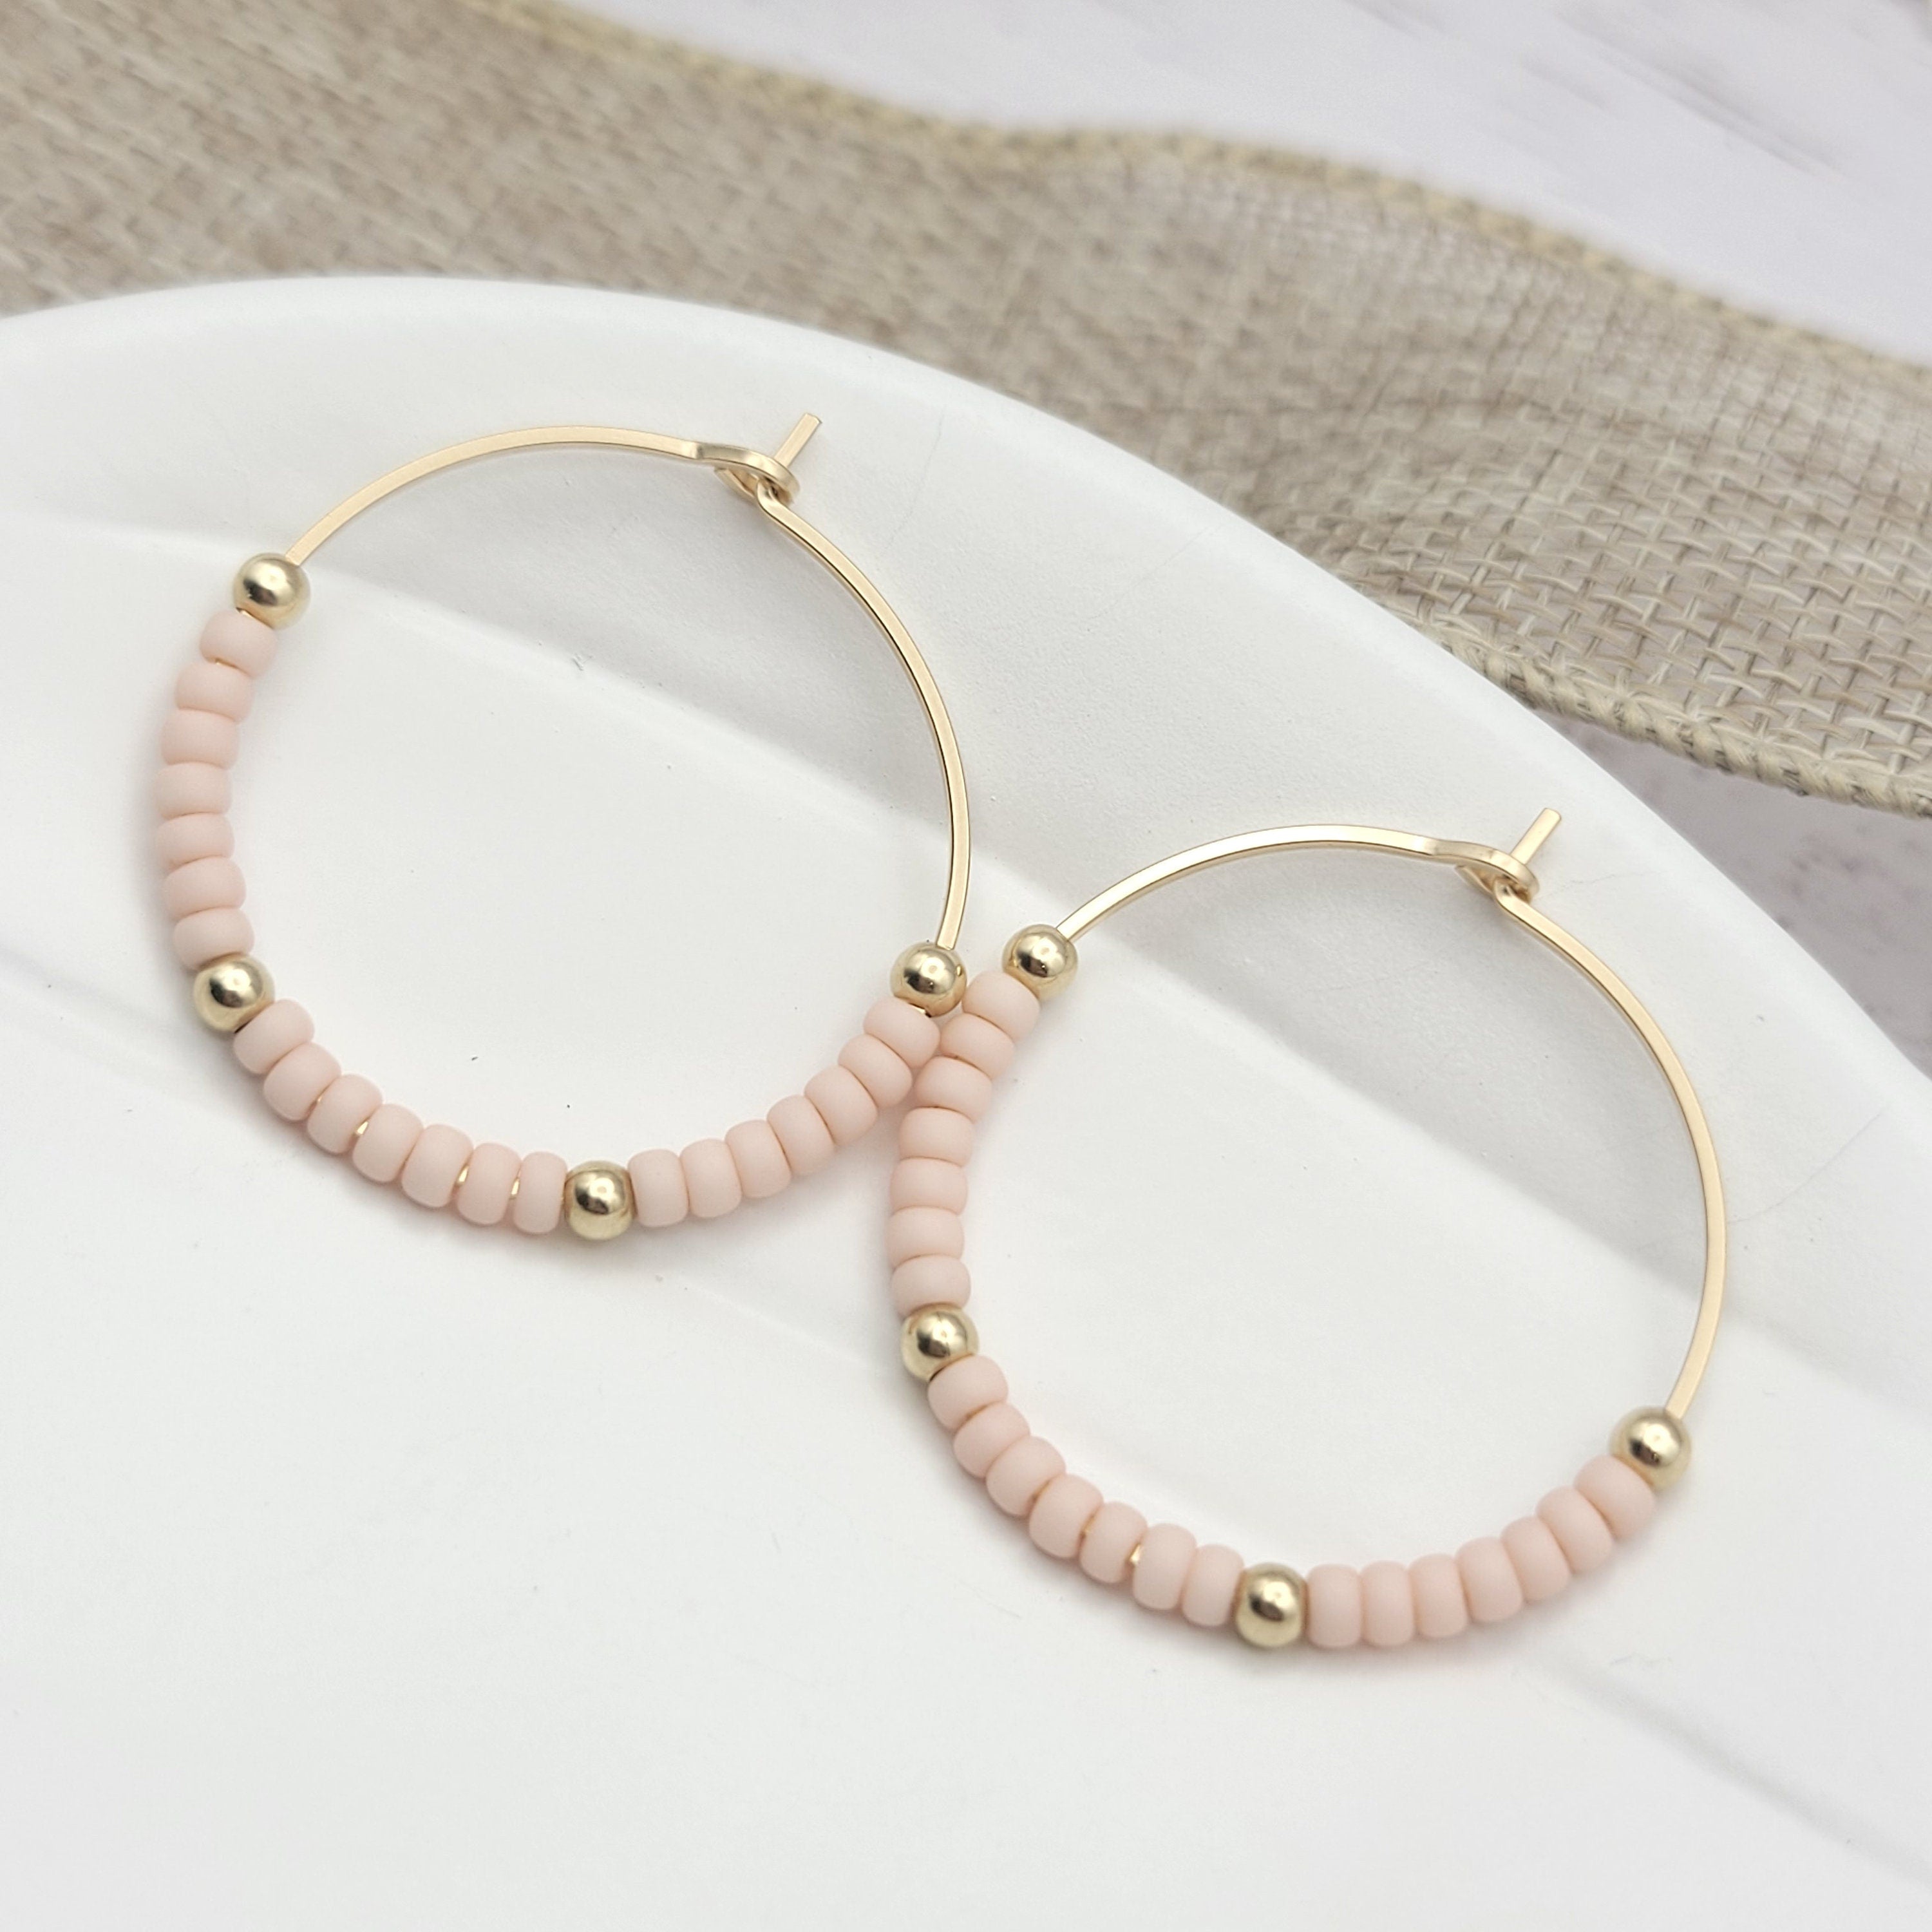 Boho - Gold Hoops with Pale Pink  Etsy   